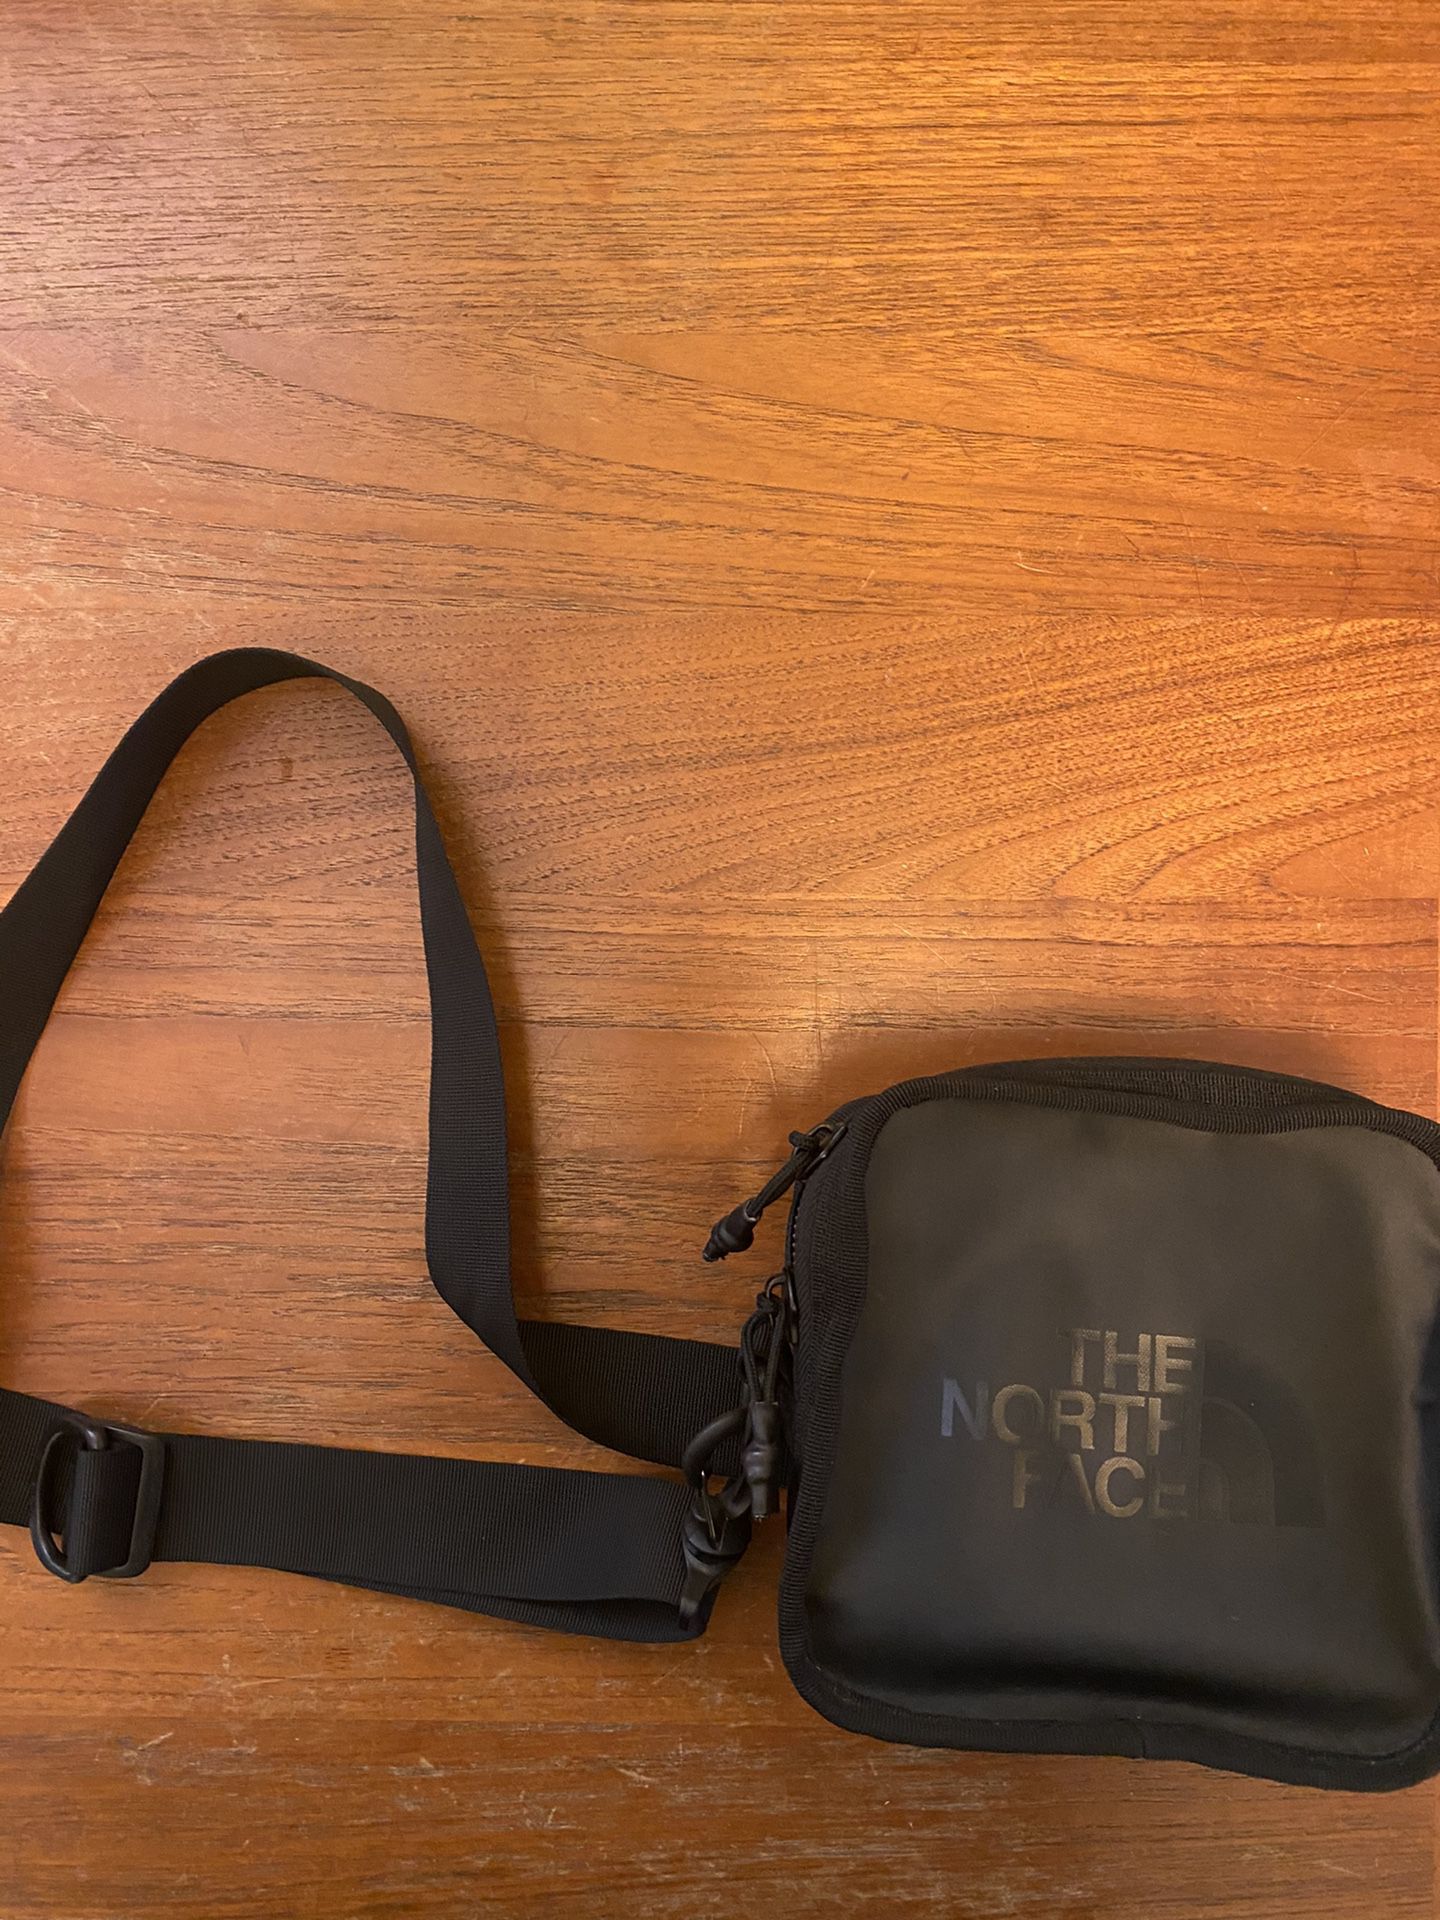 The North Face Bag